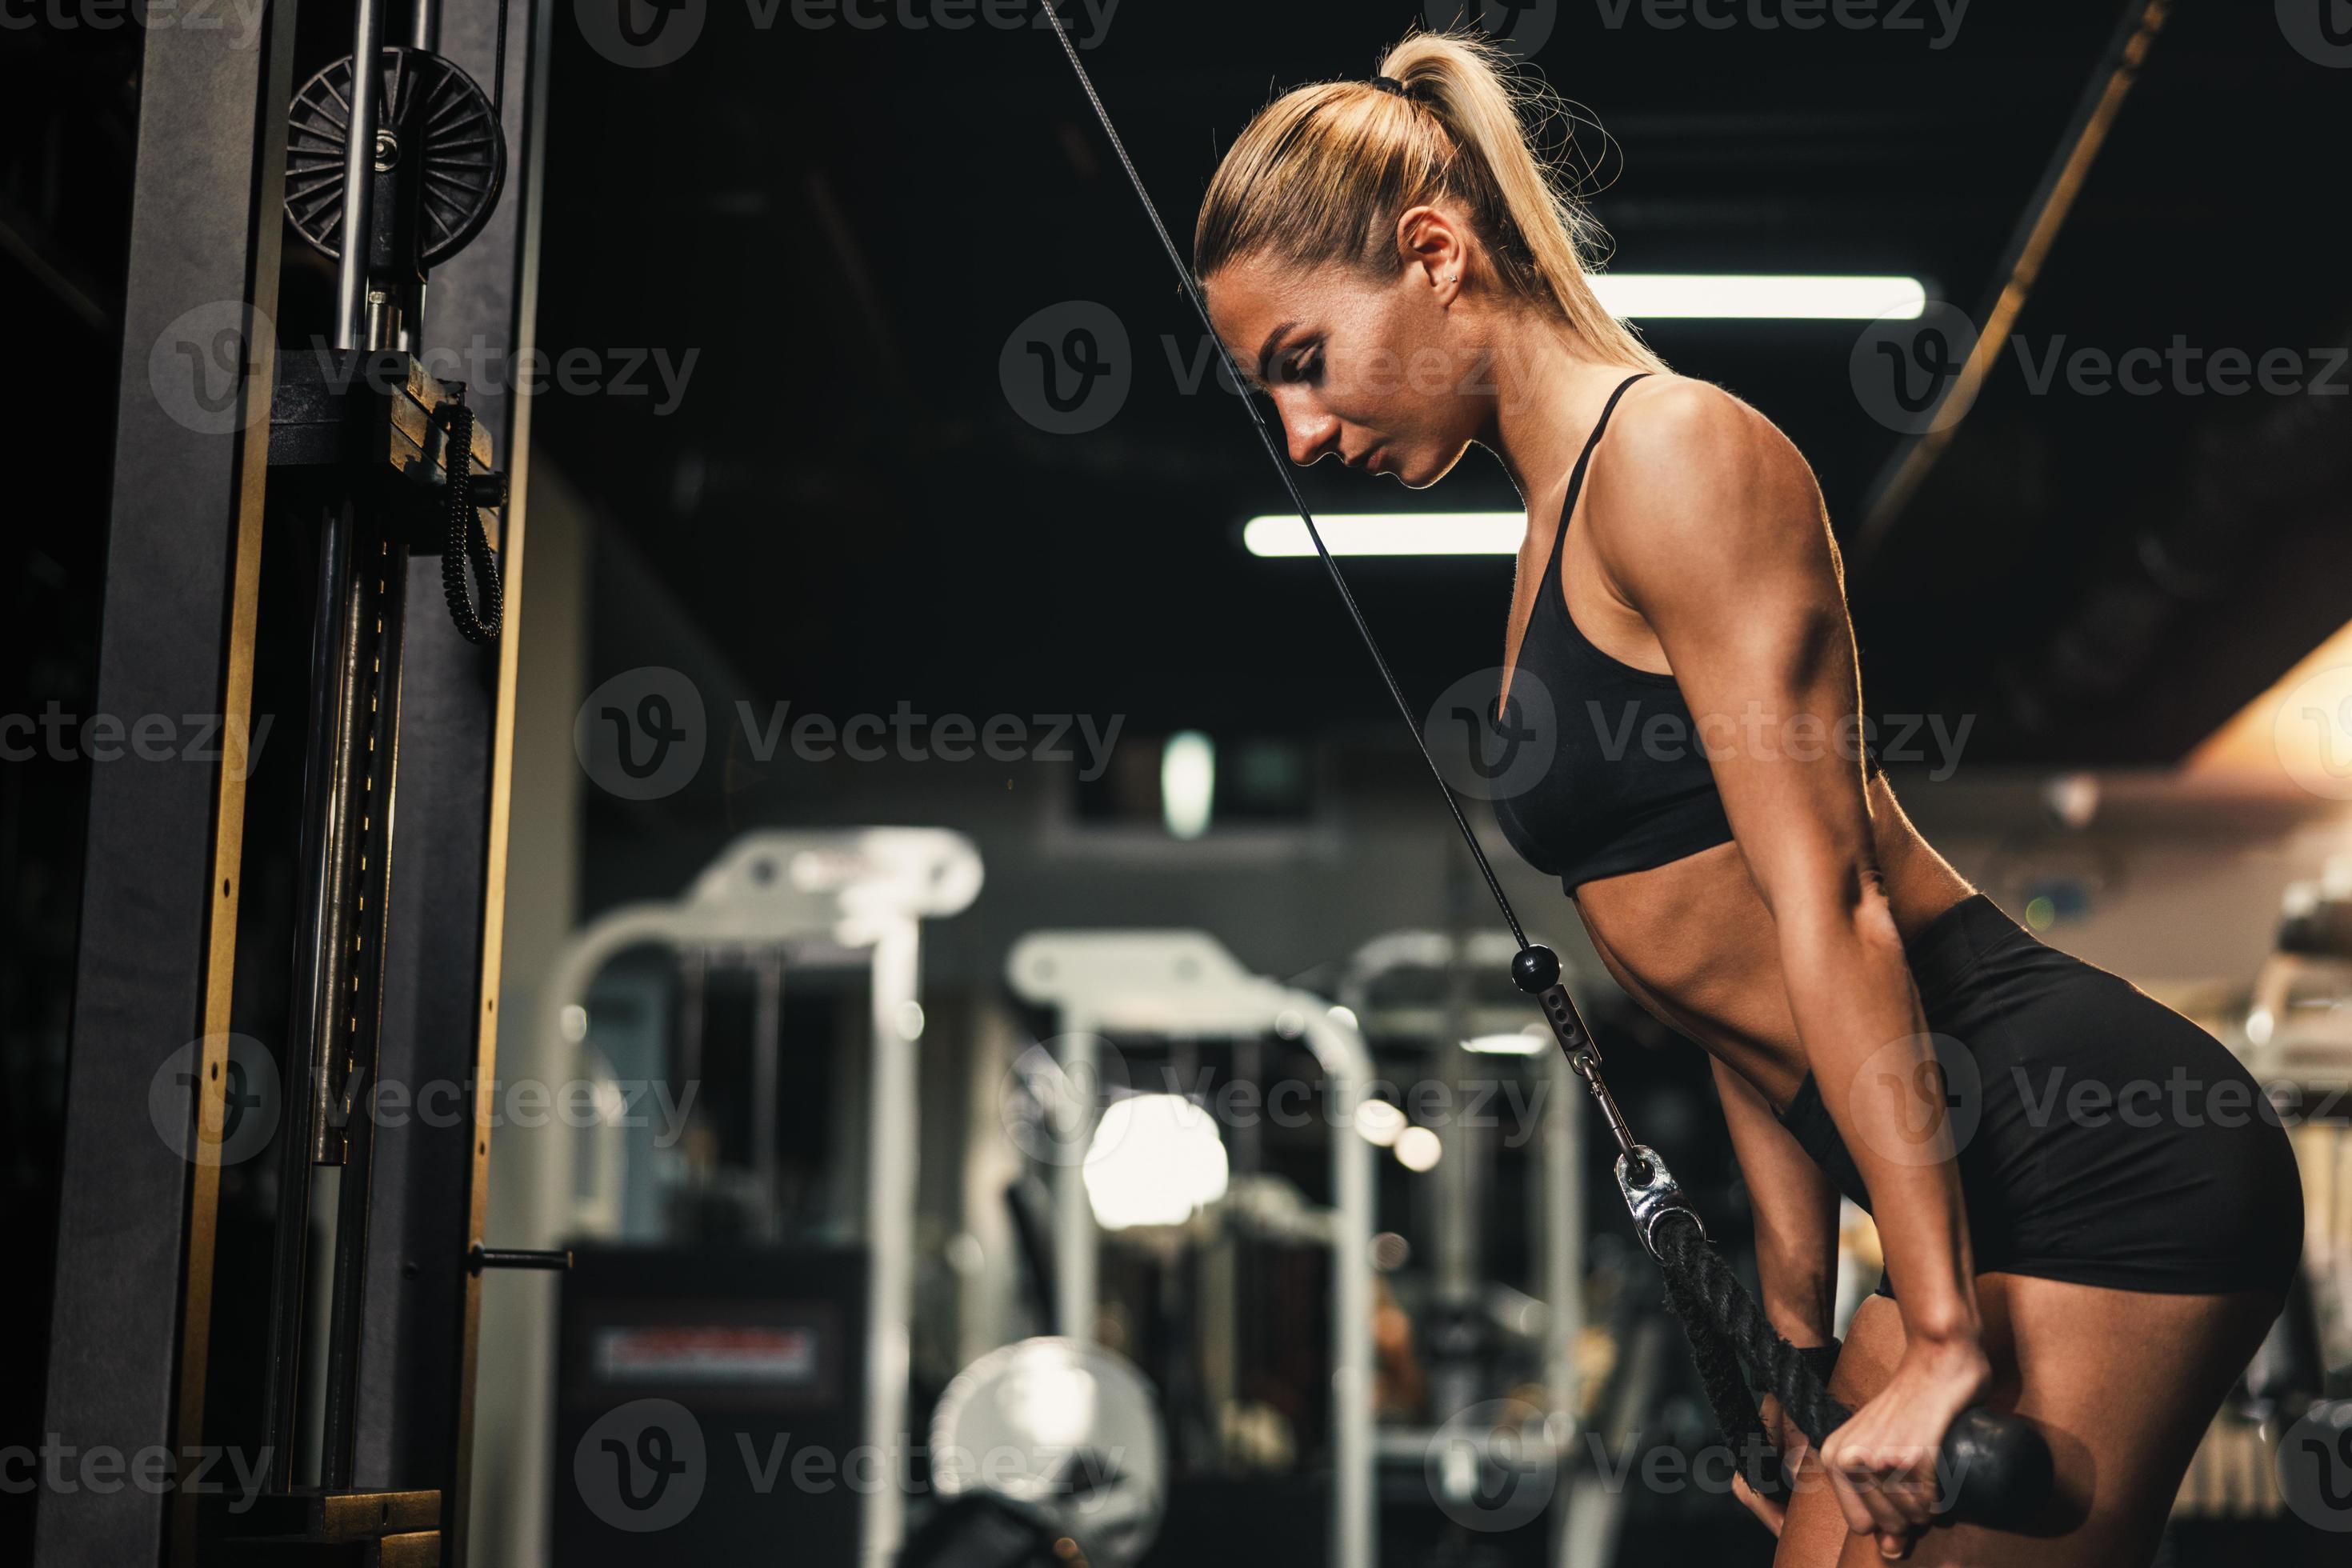 https://static.vecteezy.com/system/resources/previews/014/227/902/large_2x/woman-doing-training-on-machine-for-her-triceps-muscle-at-the-gym-photo.jpg